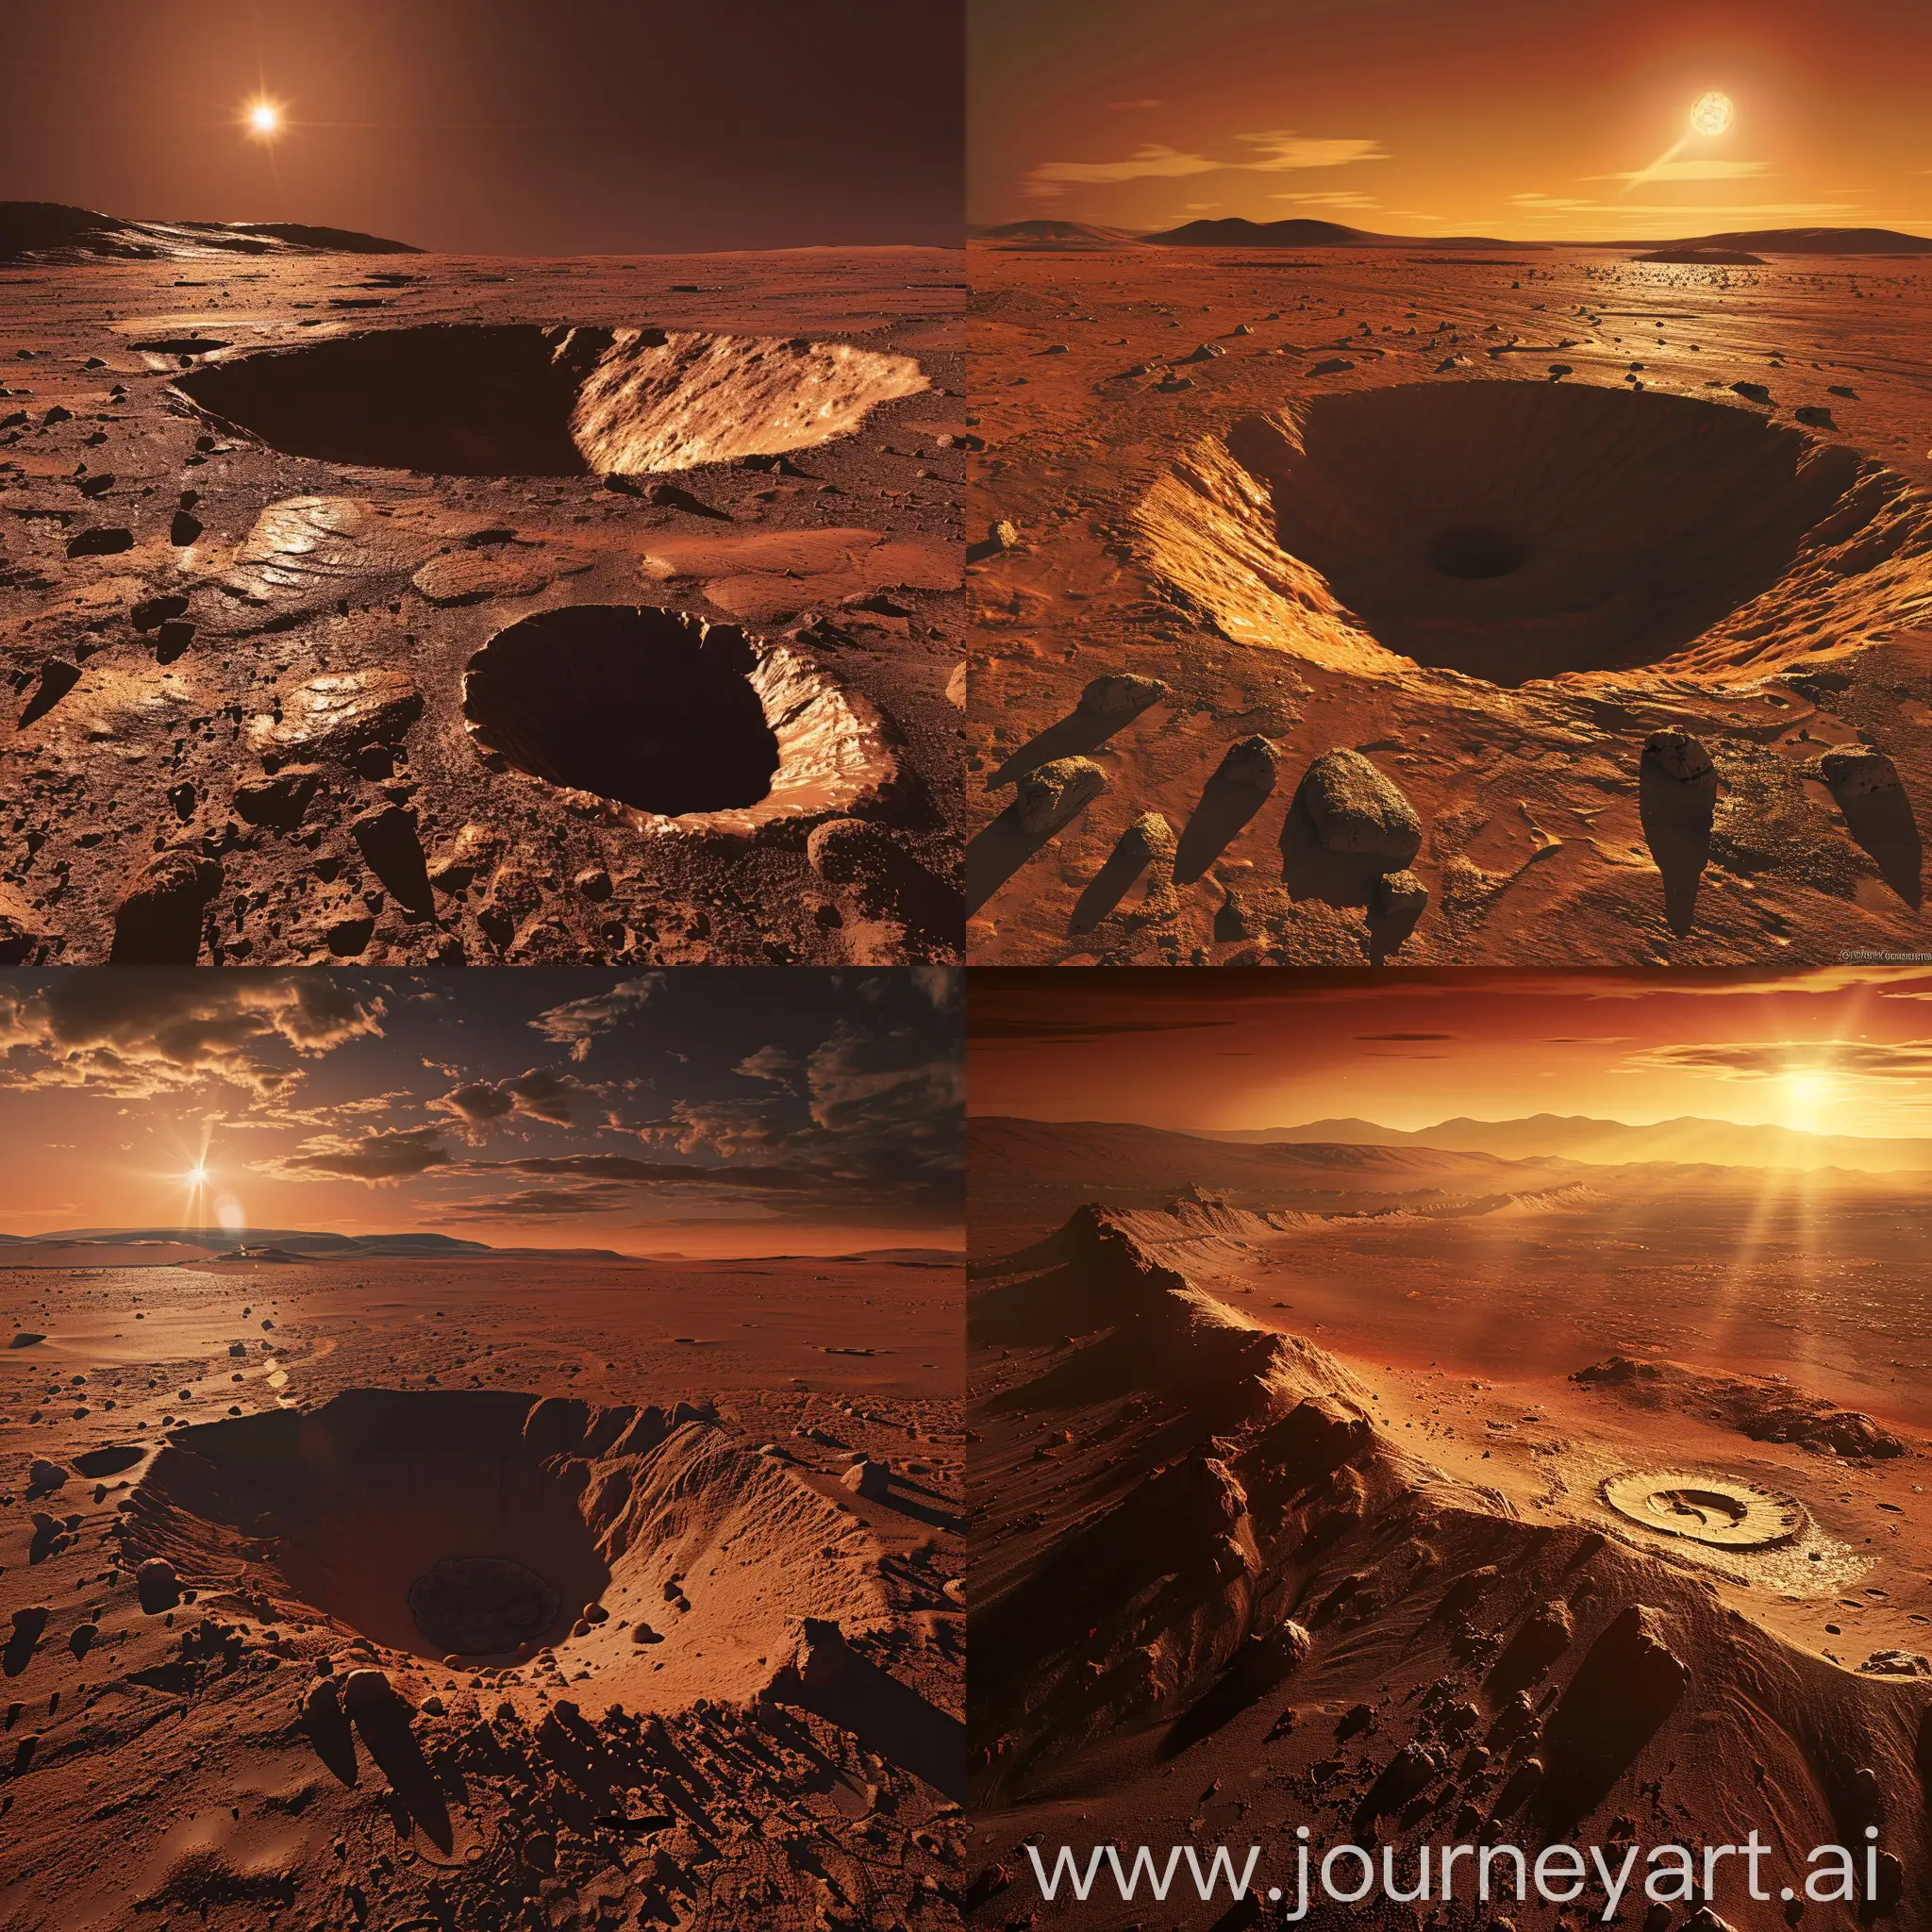 Majestic-Sunset-Landscape-of-Mars-with-Massive-Crater